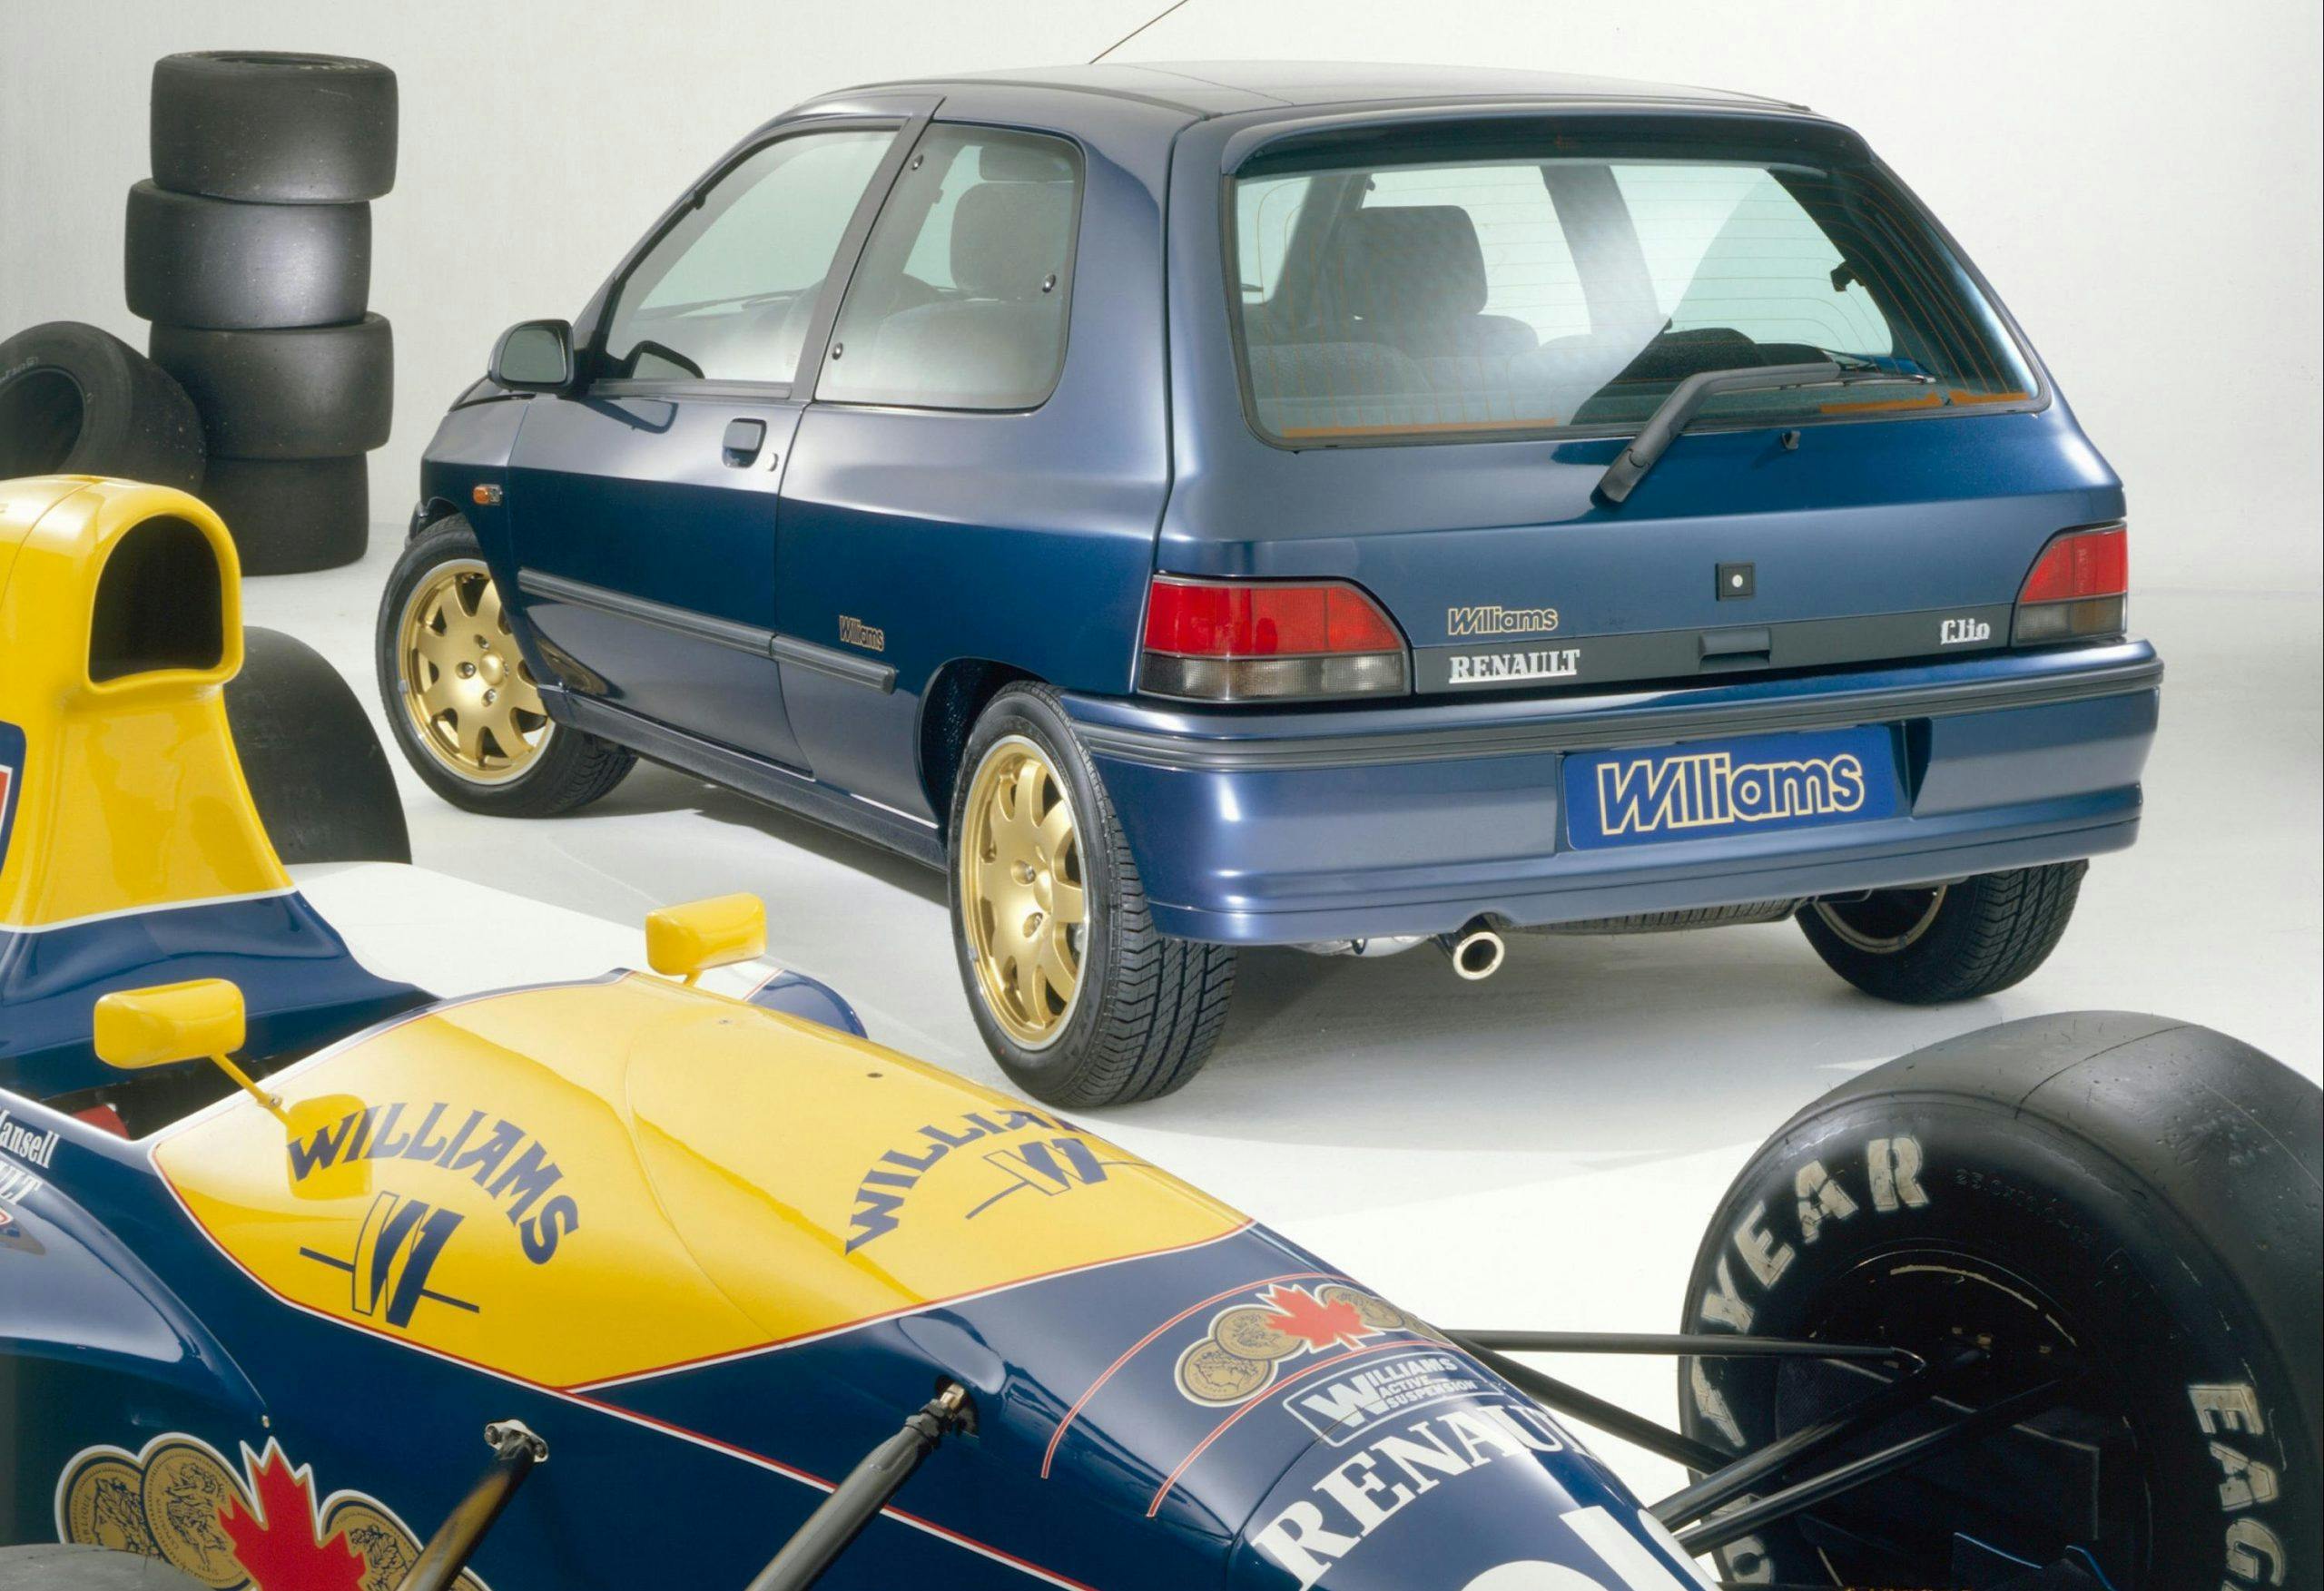 DRIVEN: Renault Clio 5 is finally here, but was it worth the wait?